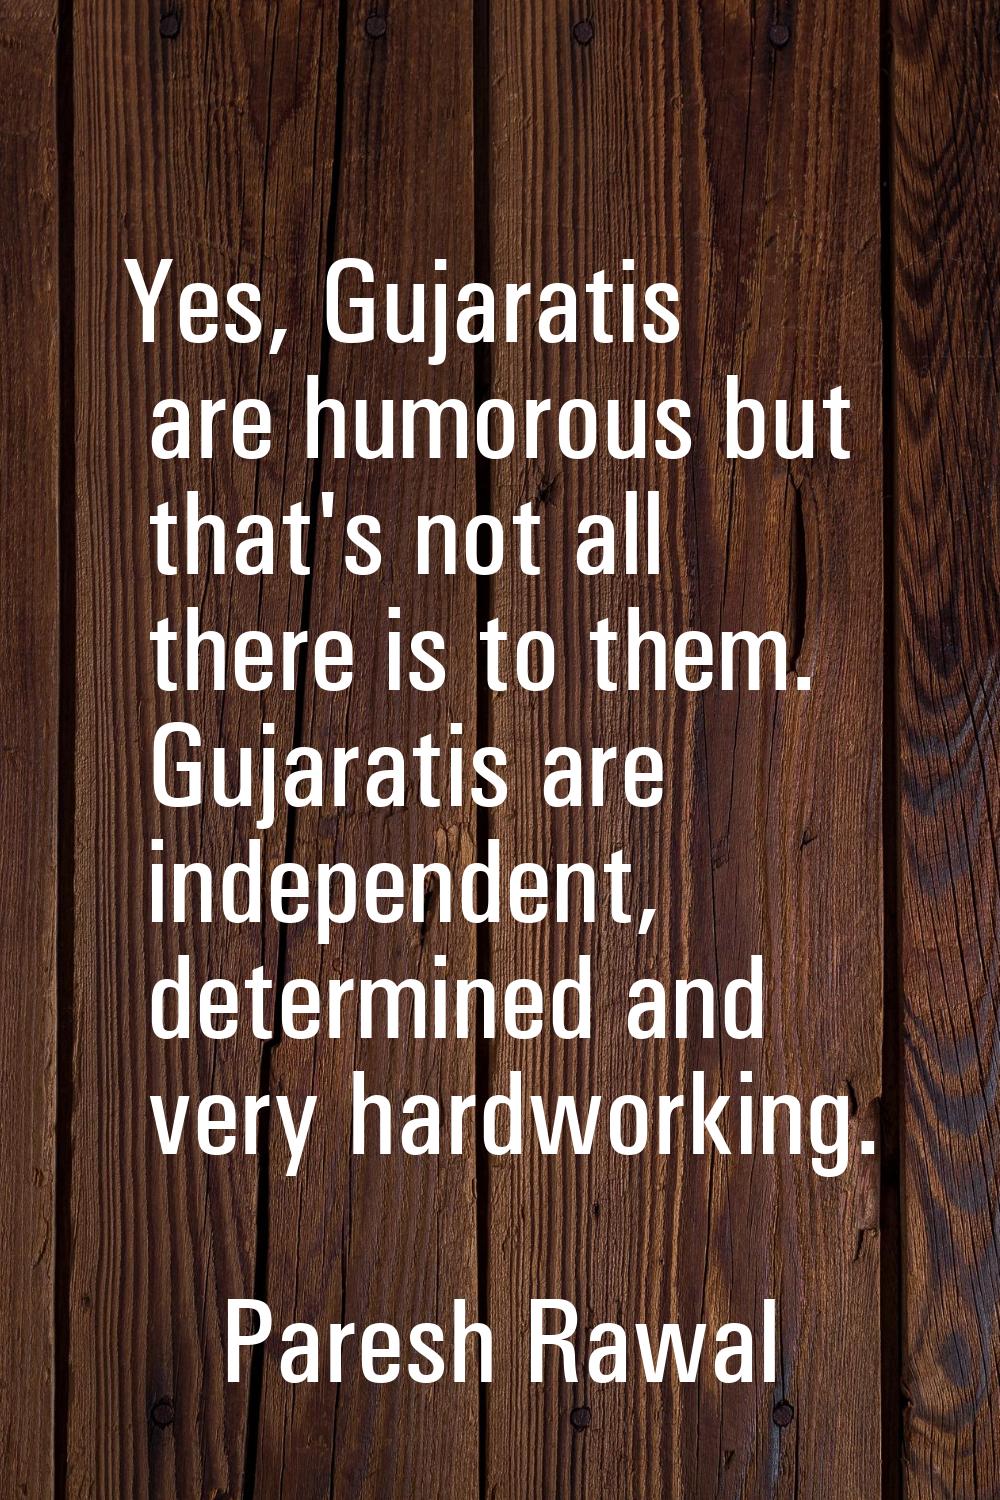 Yes, Gujaratis are humorous but that's not all there is to them. Gujaratis are independent, determi